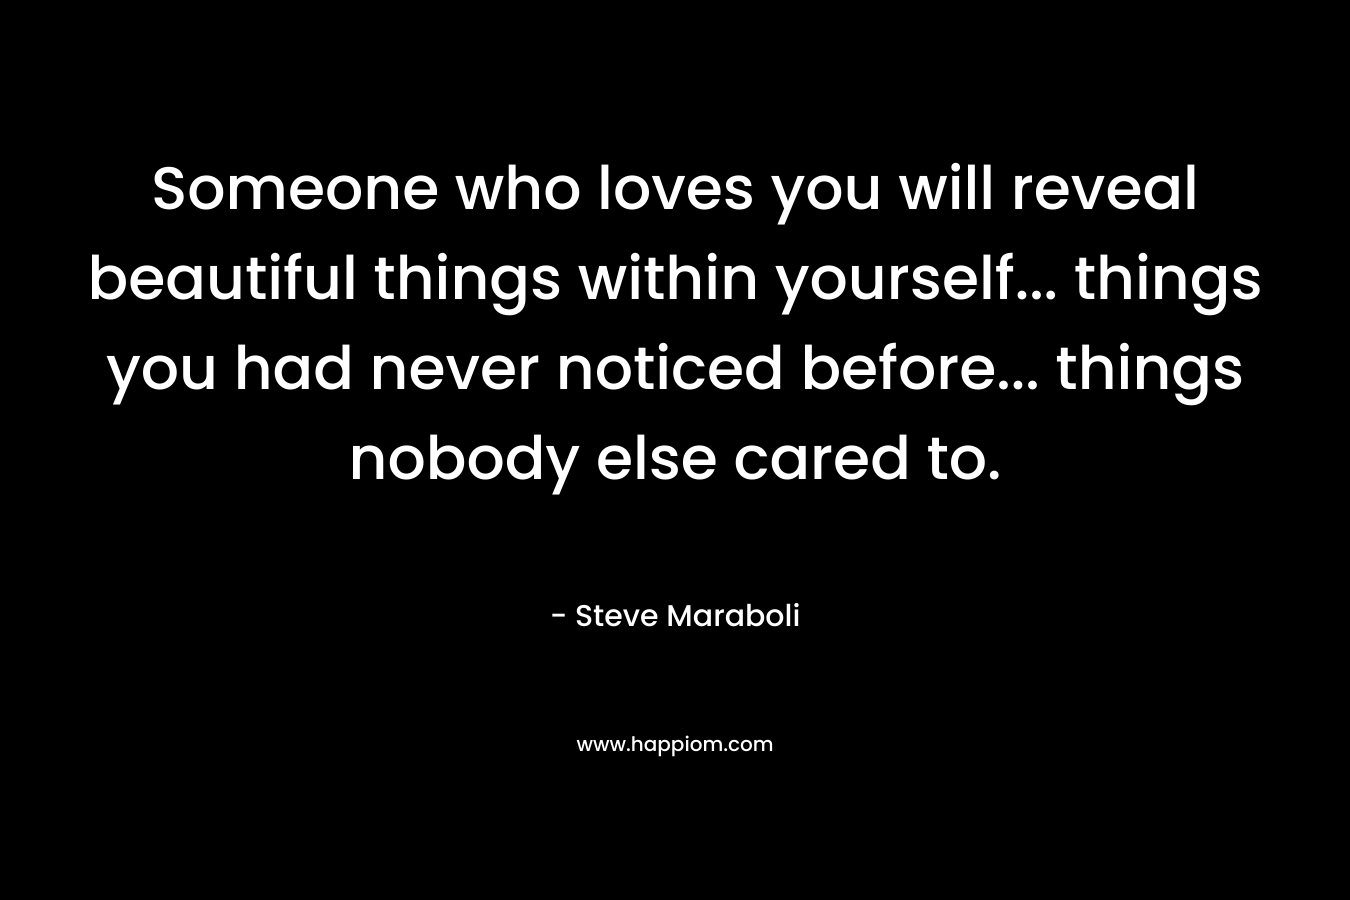 Someone who loves you will reveal beautiful things within yourself... things you had never noticed before... things nobody else cared to.